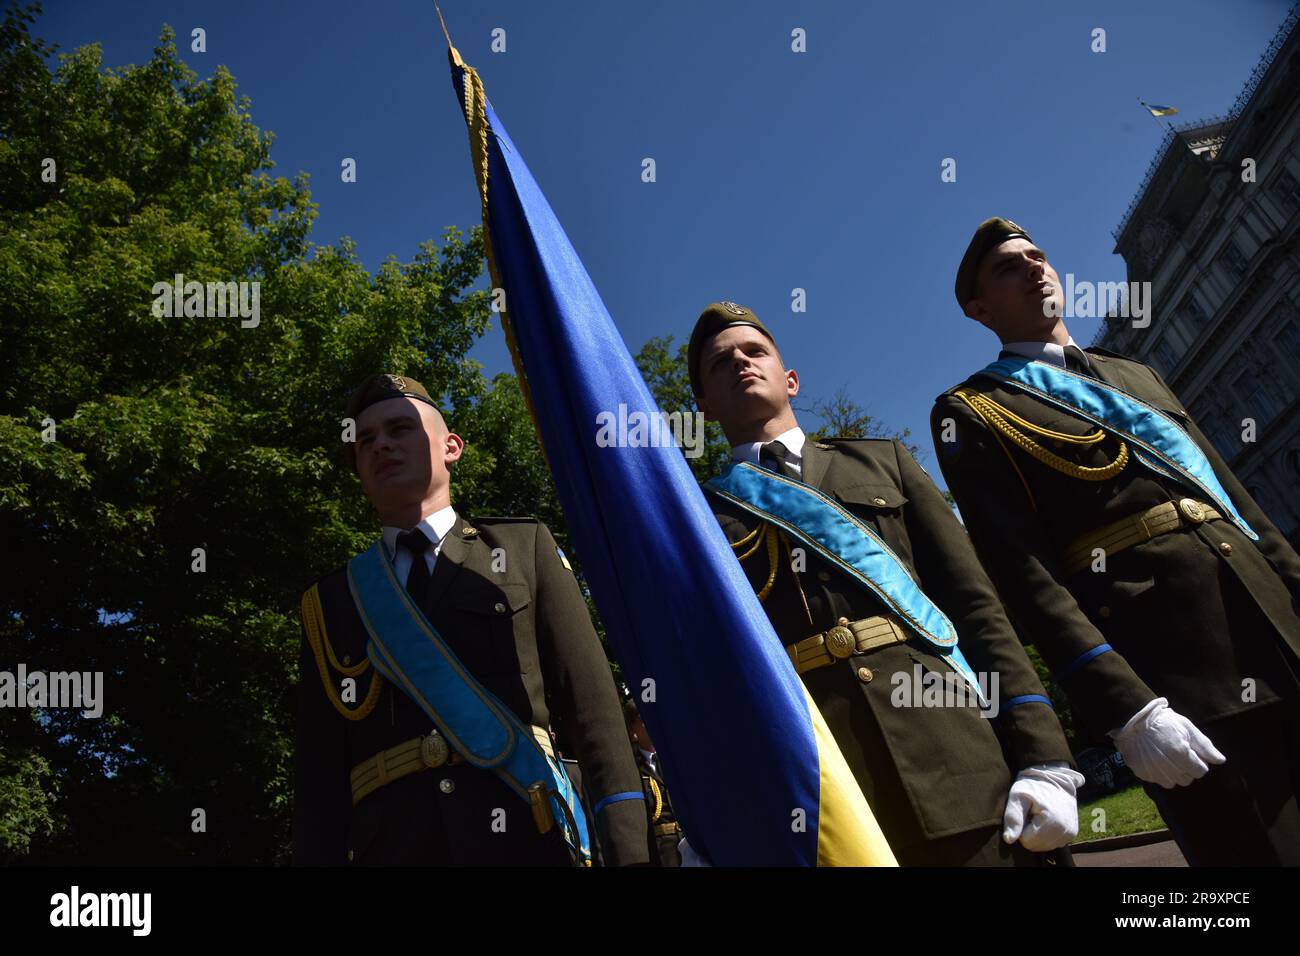 Cadets from the honor guard during the celebration of the Constitution Day of Ukraine. Ukraine celebrated the 27th anniversary of the adoption of the country's basic law - the constitution. In the conditions of the Russian-Ukrainian war, official events were very short. In Lviv, the Ukrainian flag was raised, honor guard marched, and a military band performed. (Photo by Pavlo Palamarchuk / SOPA mages/Sipa USA) Stock Photo